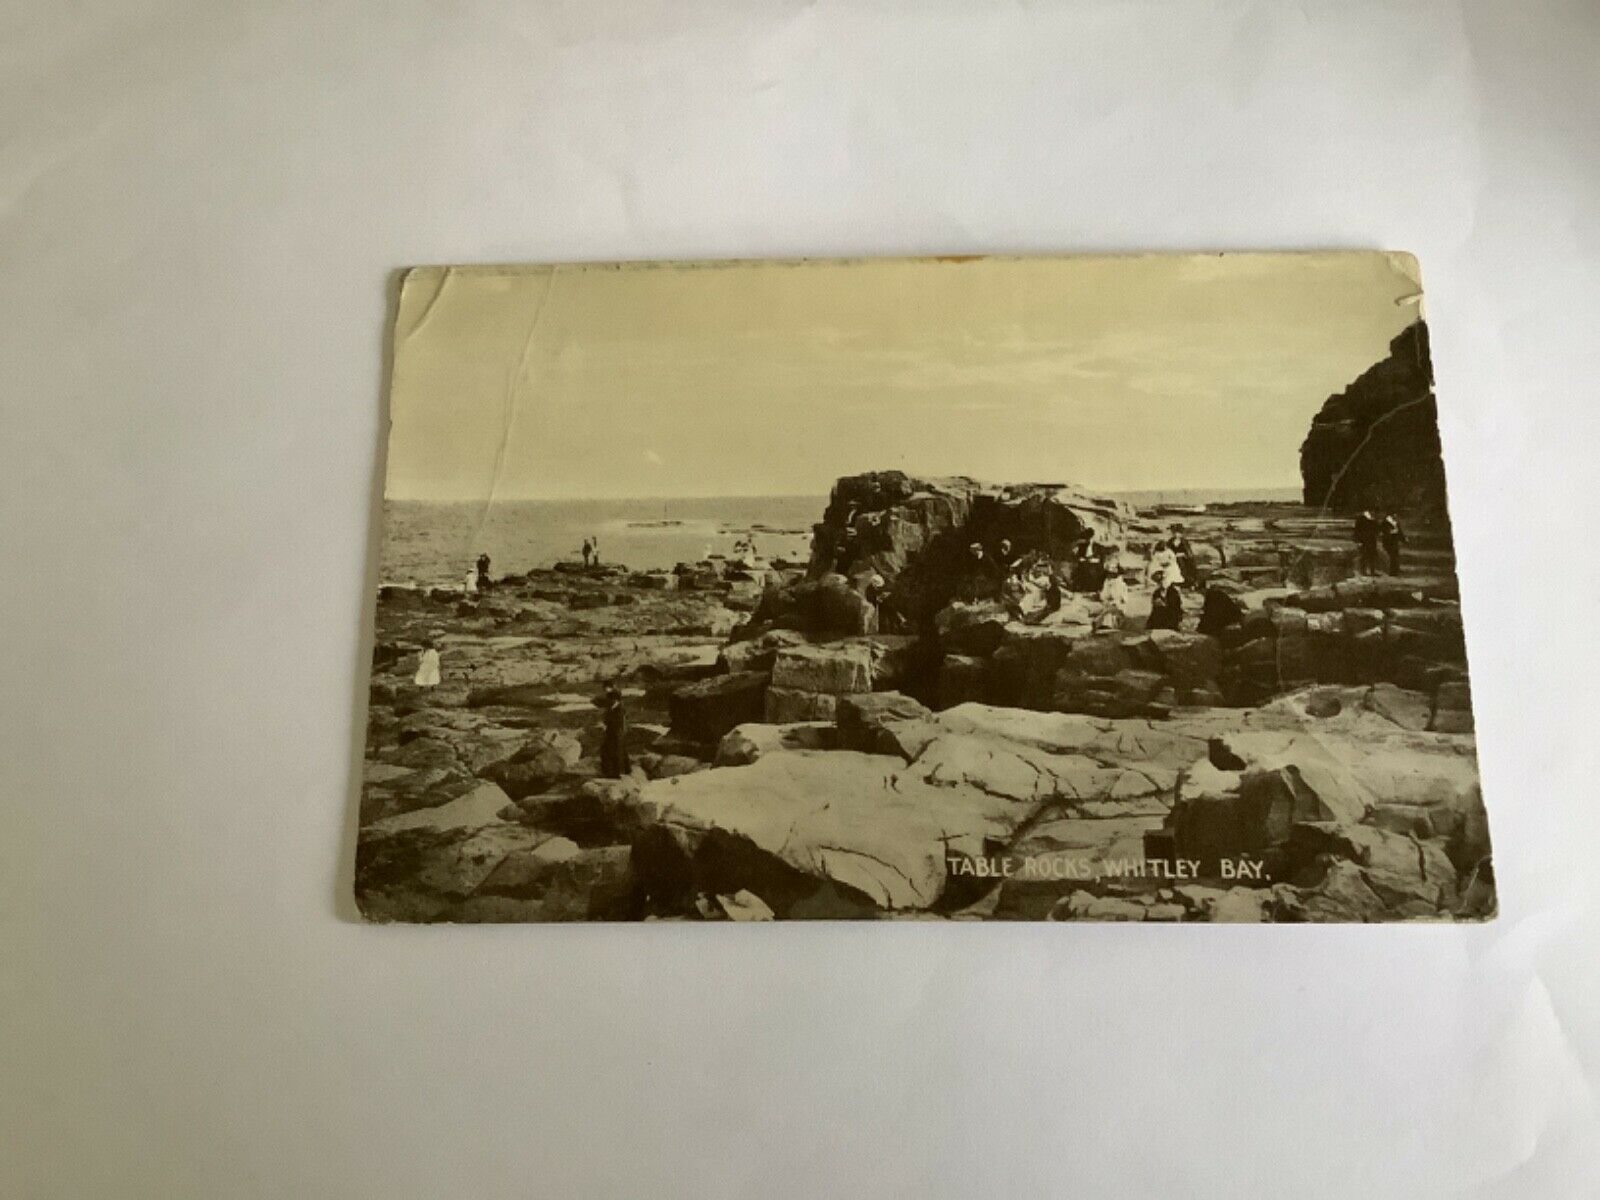 House Clearance - Old service Table rocks, Whitley bay, c1921